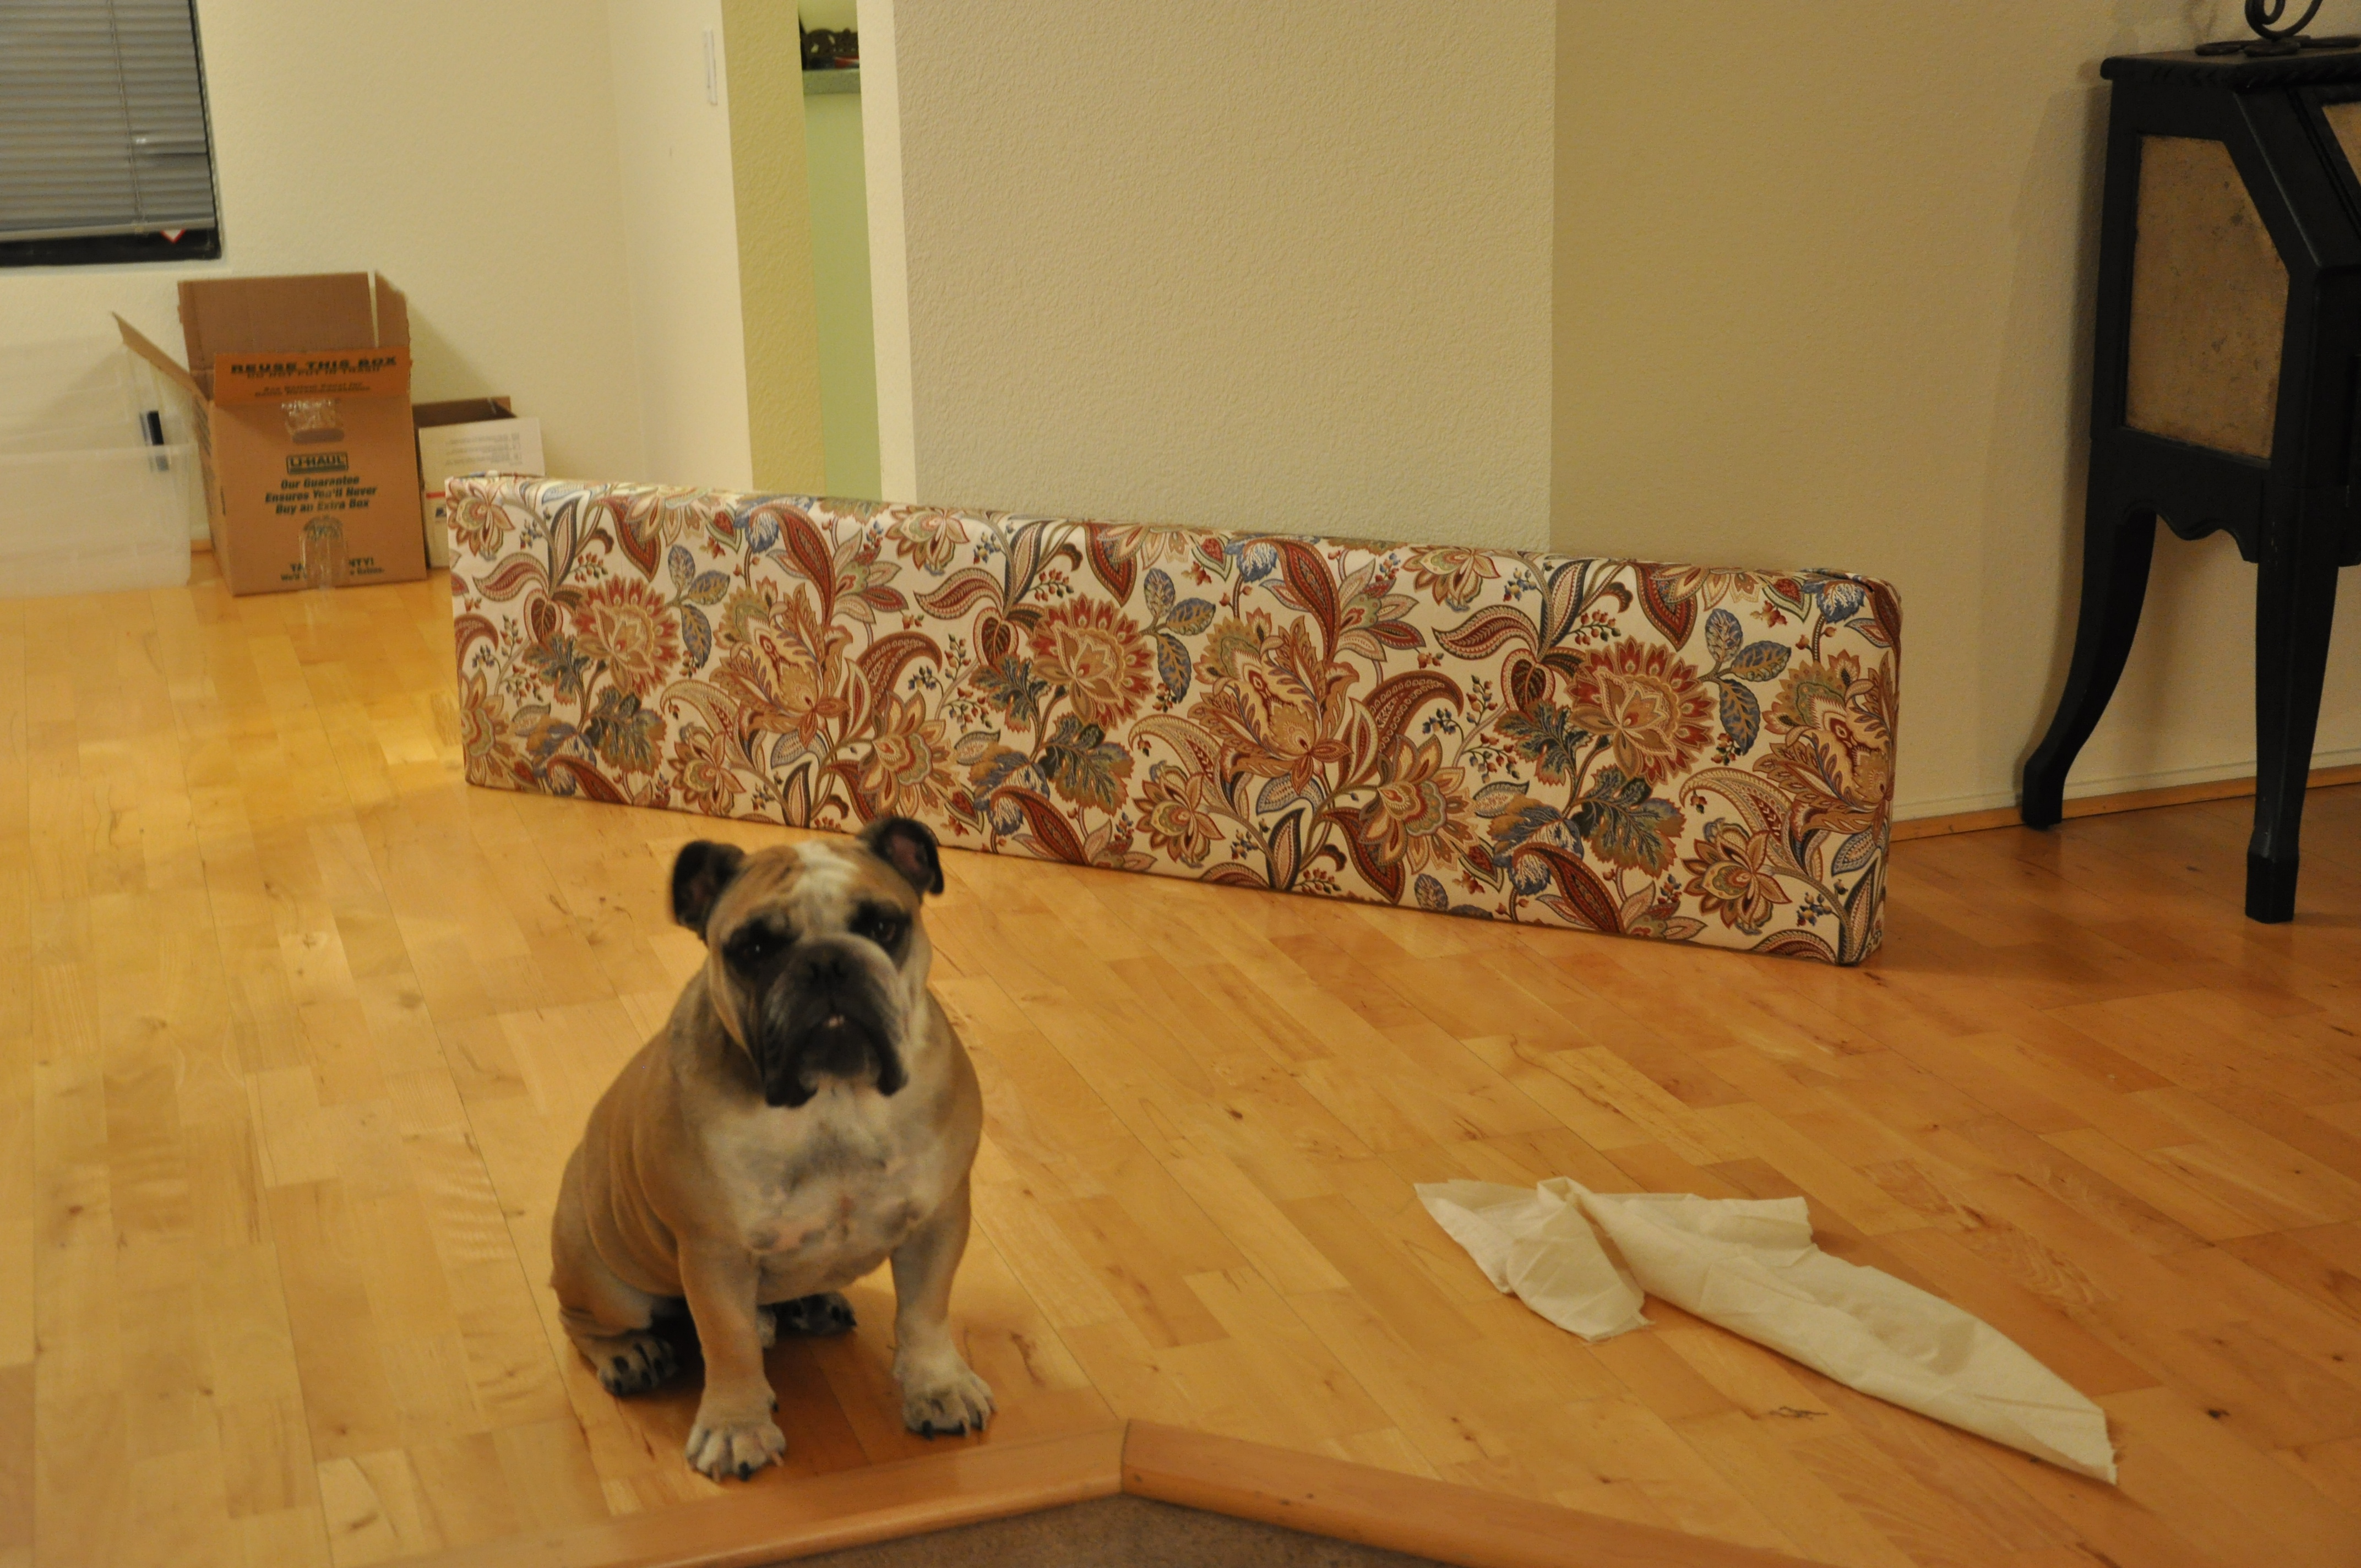 here's one finished, pre-placement, being closely guarded by a fiece watchdog